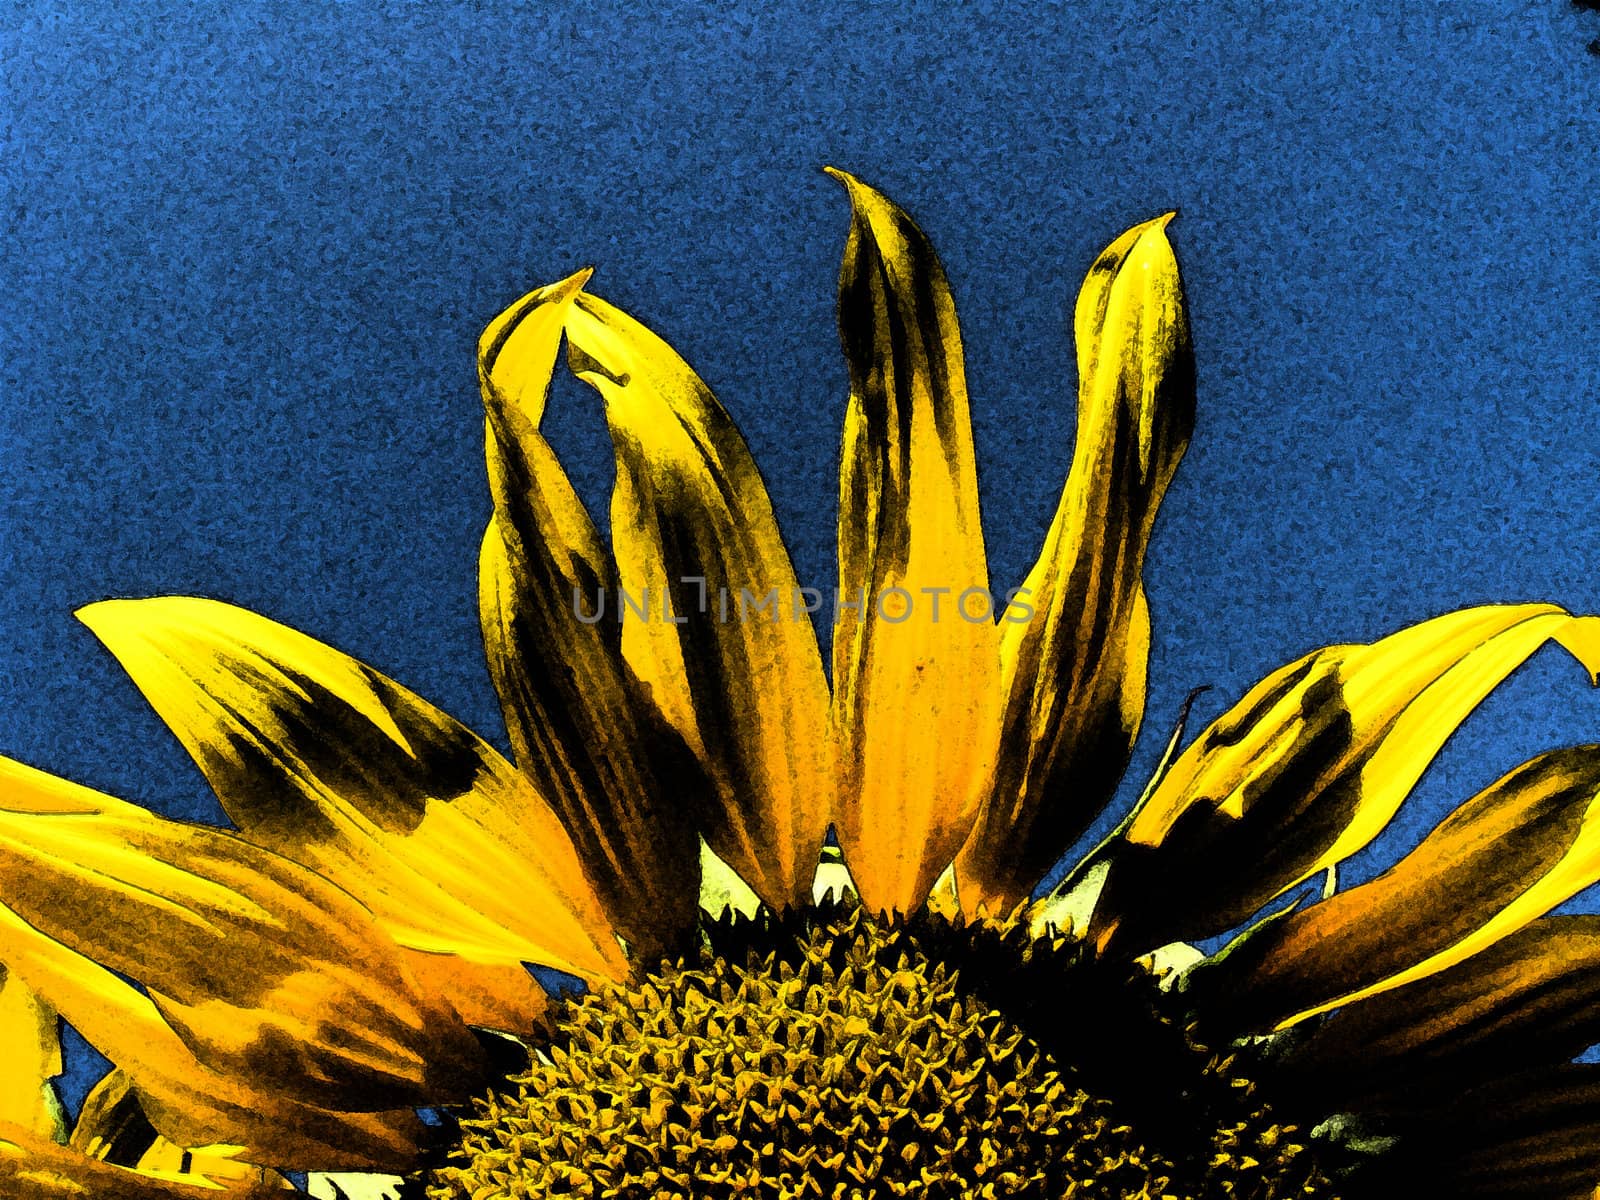 fragment of the beautiful sunflower on the blue sky background by alexmak